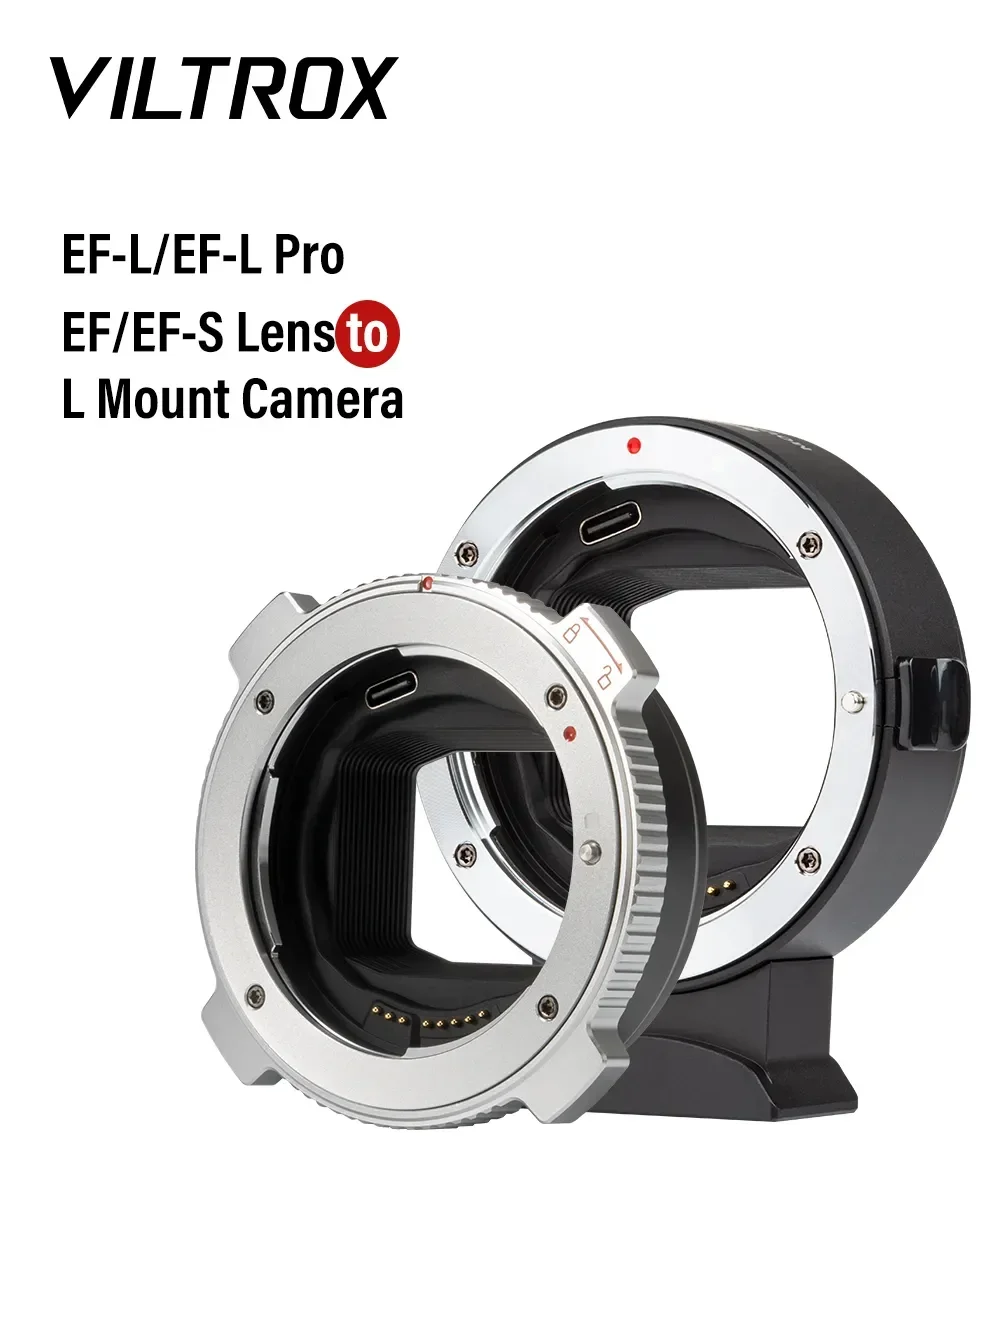 

VILTROX EF-L Pro Auto Focus Lens Mount Adapter For Canon EF EF-S Lens To L Mount Camera Leica SL2 Panasonic S1 S1R S1H S5